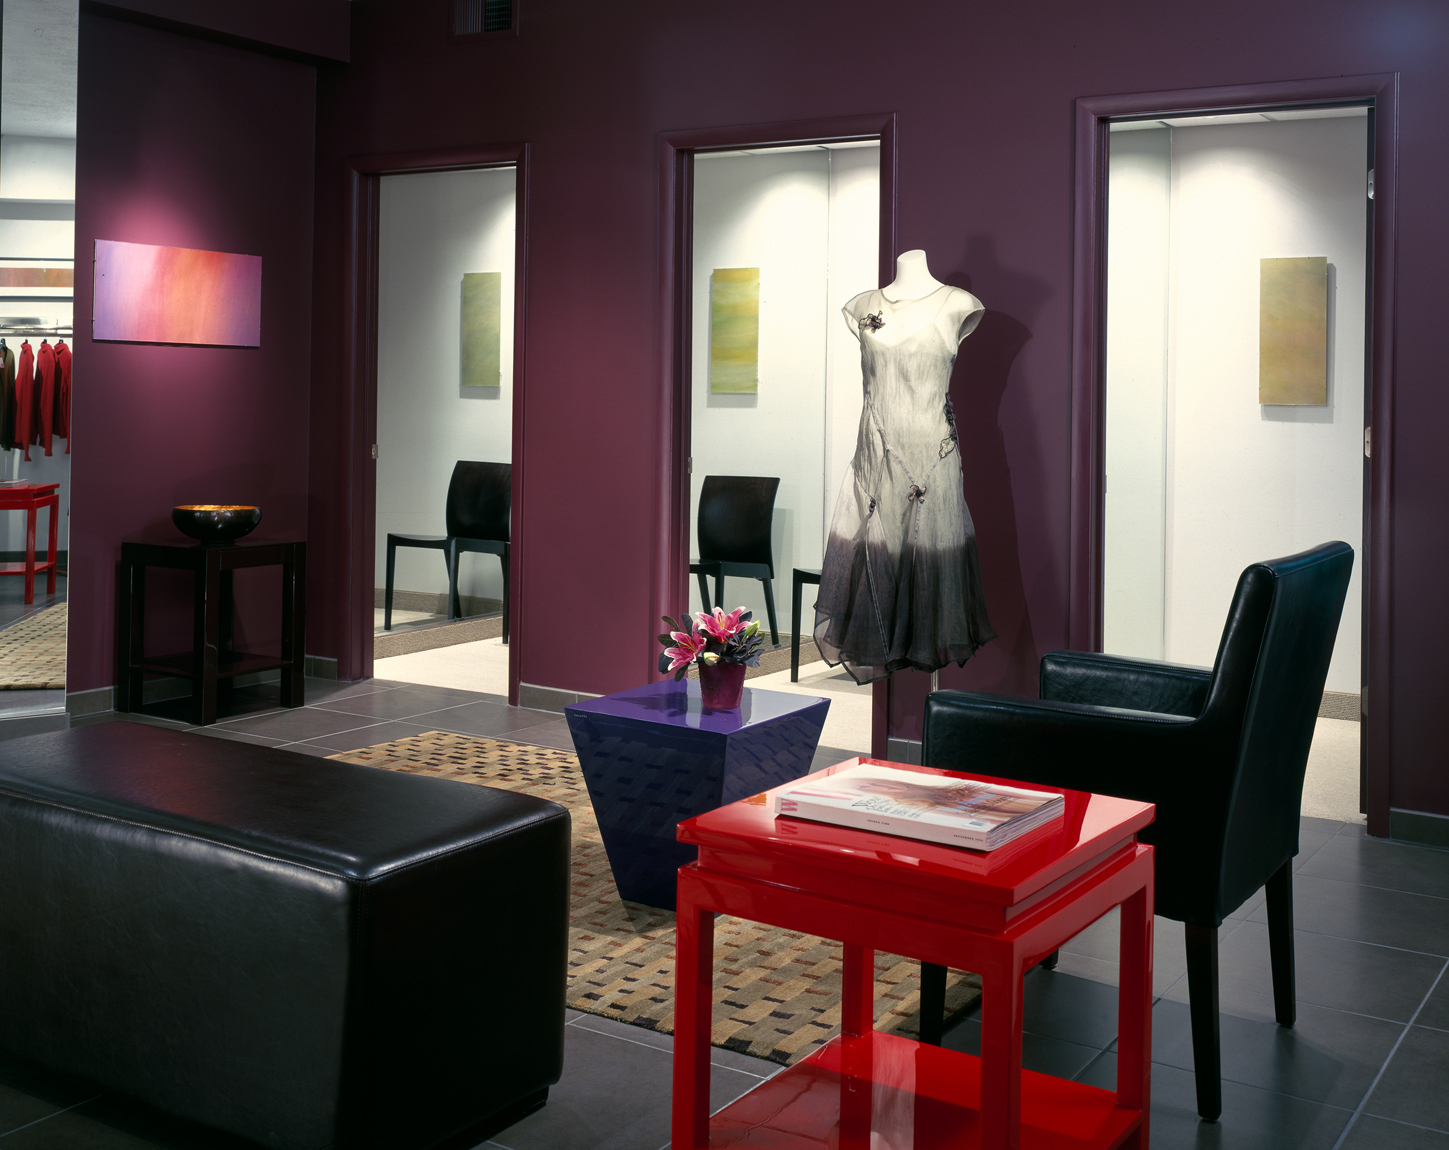 Interior view towards changing rooms in an upscale clothing boutique. Black leather furnishings are framed by maroon walls and the centerpiece features a bright red table.